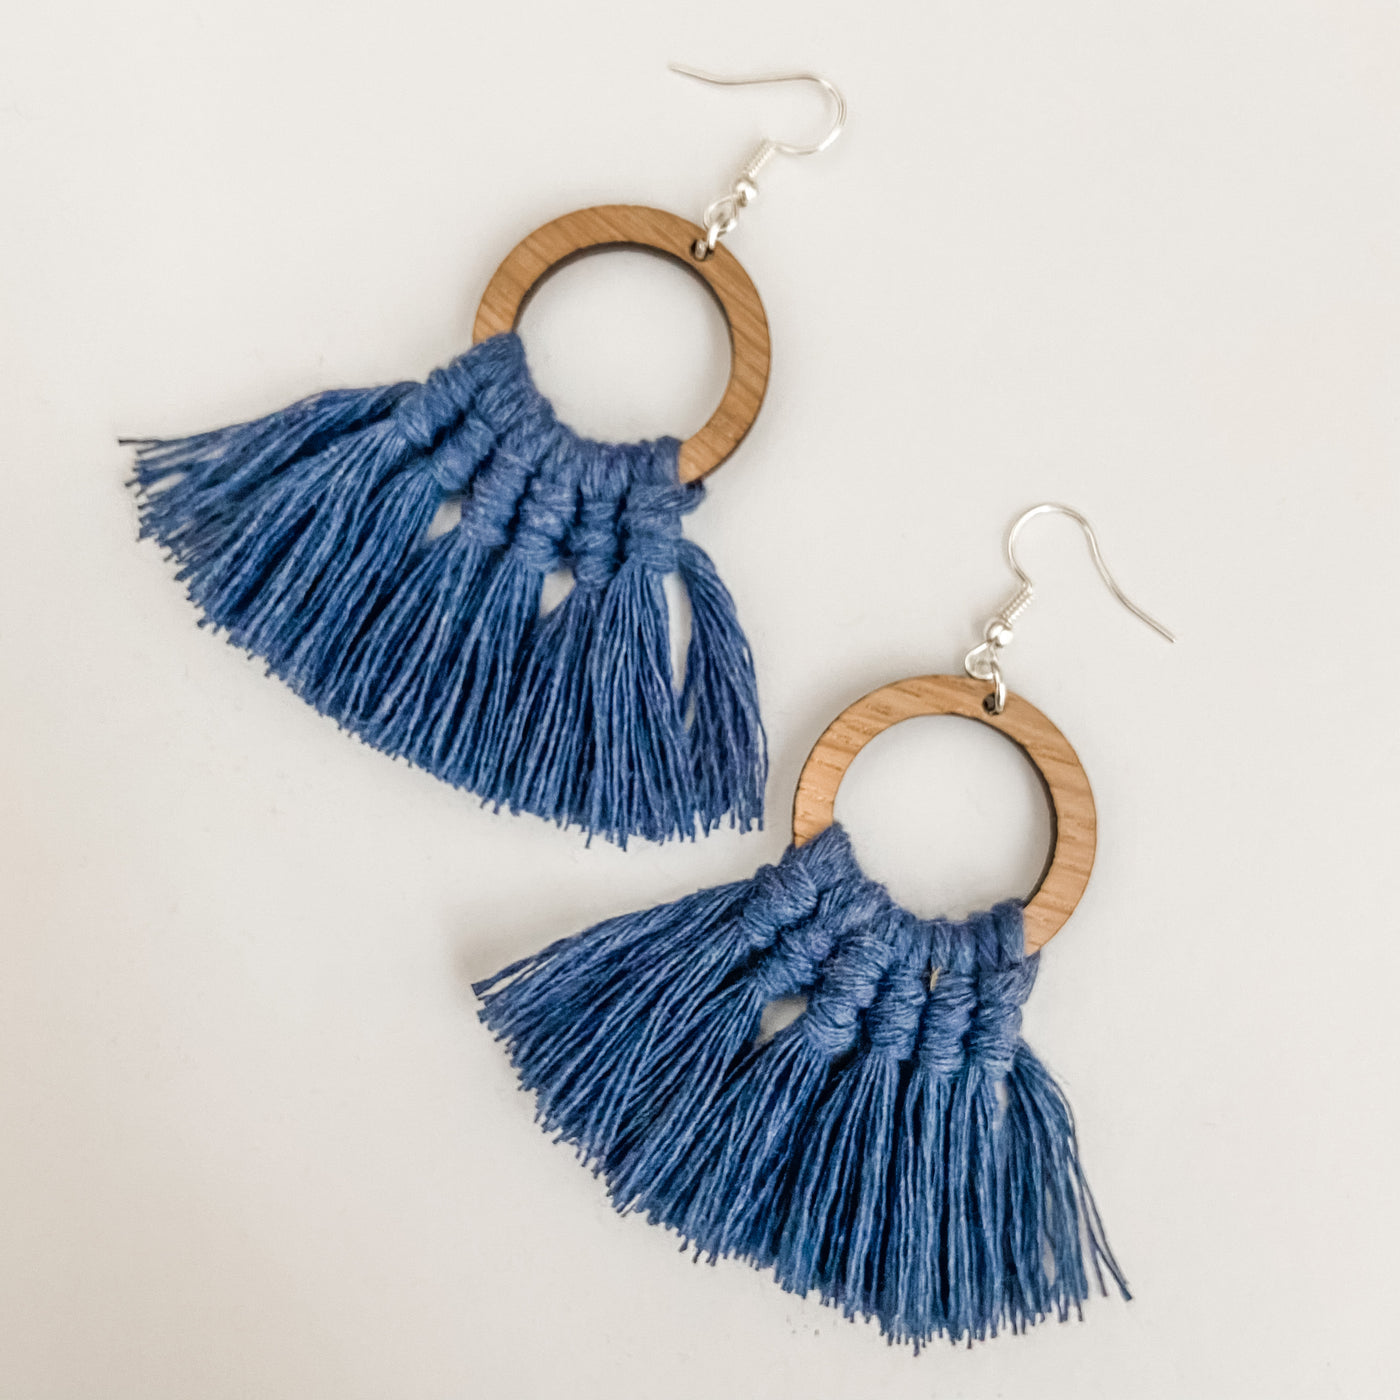 Our new Macrame Earring Kits are the perfect idea for the beginner and they make an ideal gift!  Kit contains:  * 1 set of earring frames in Oak with nickel-free earring findings (silver) attached  * 4 metres of Cotton   * Instructions   Various colours available.